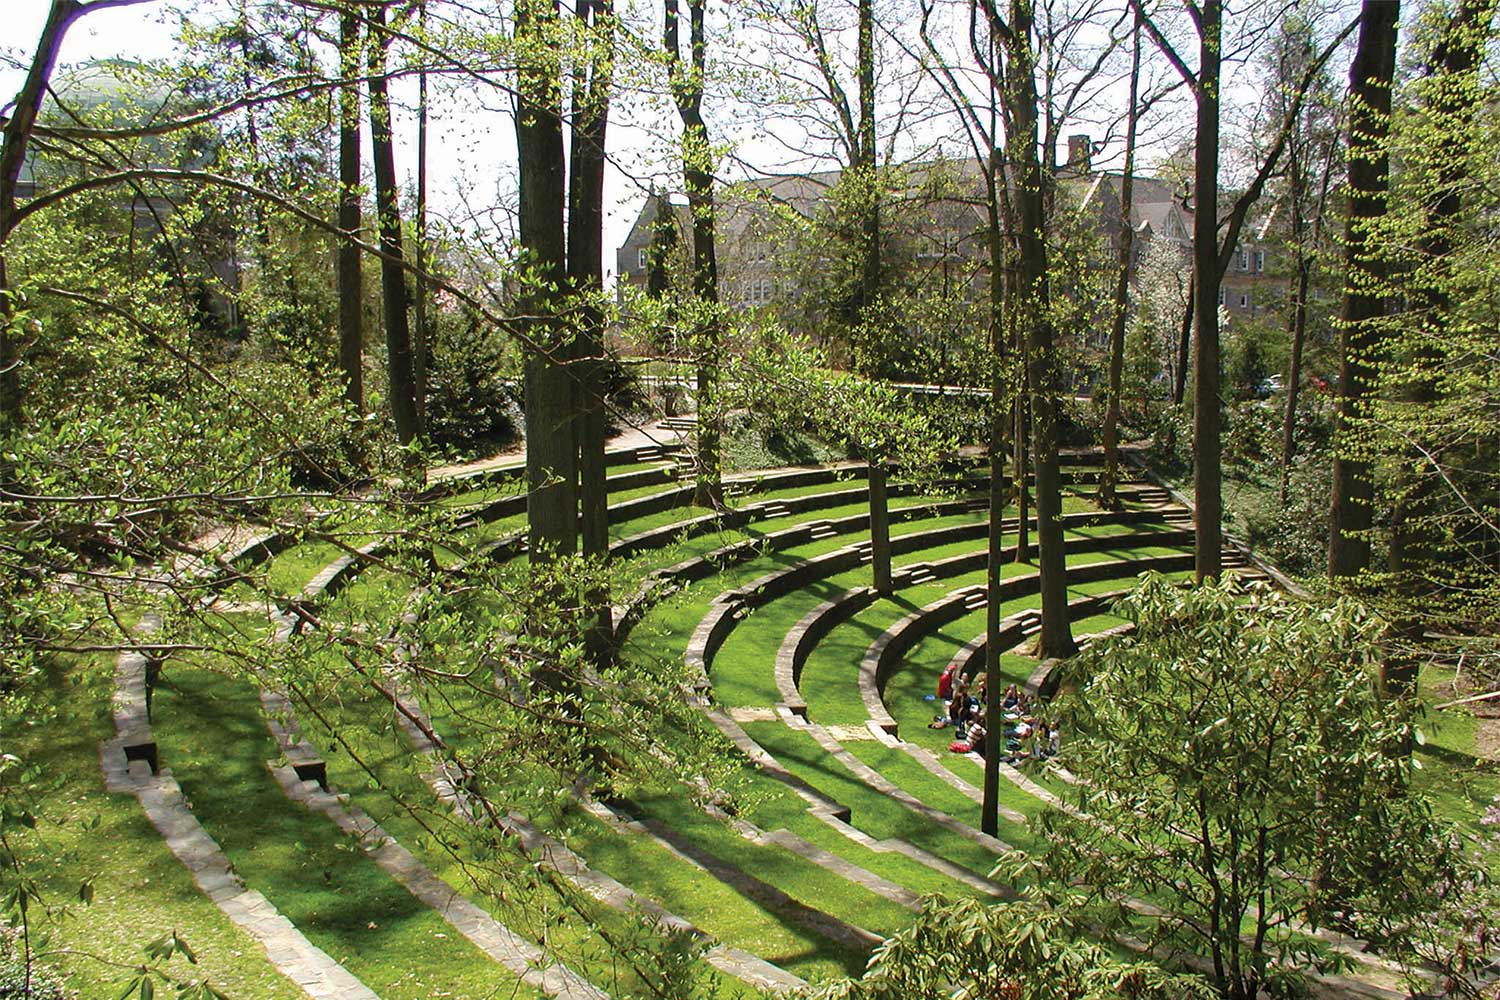 grass amphitheater with students sitting